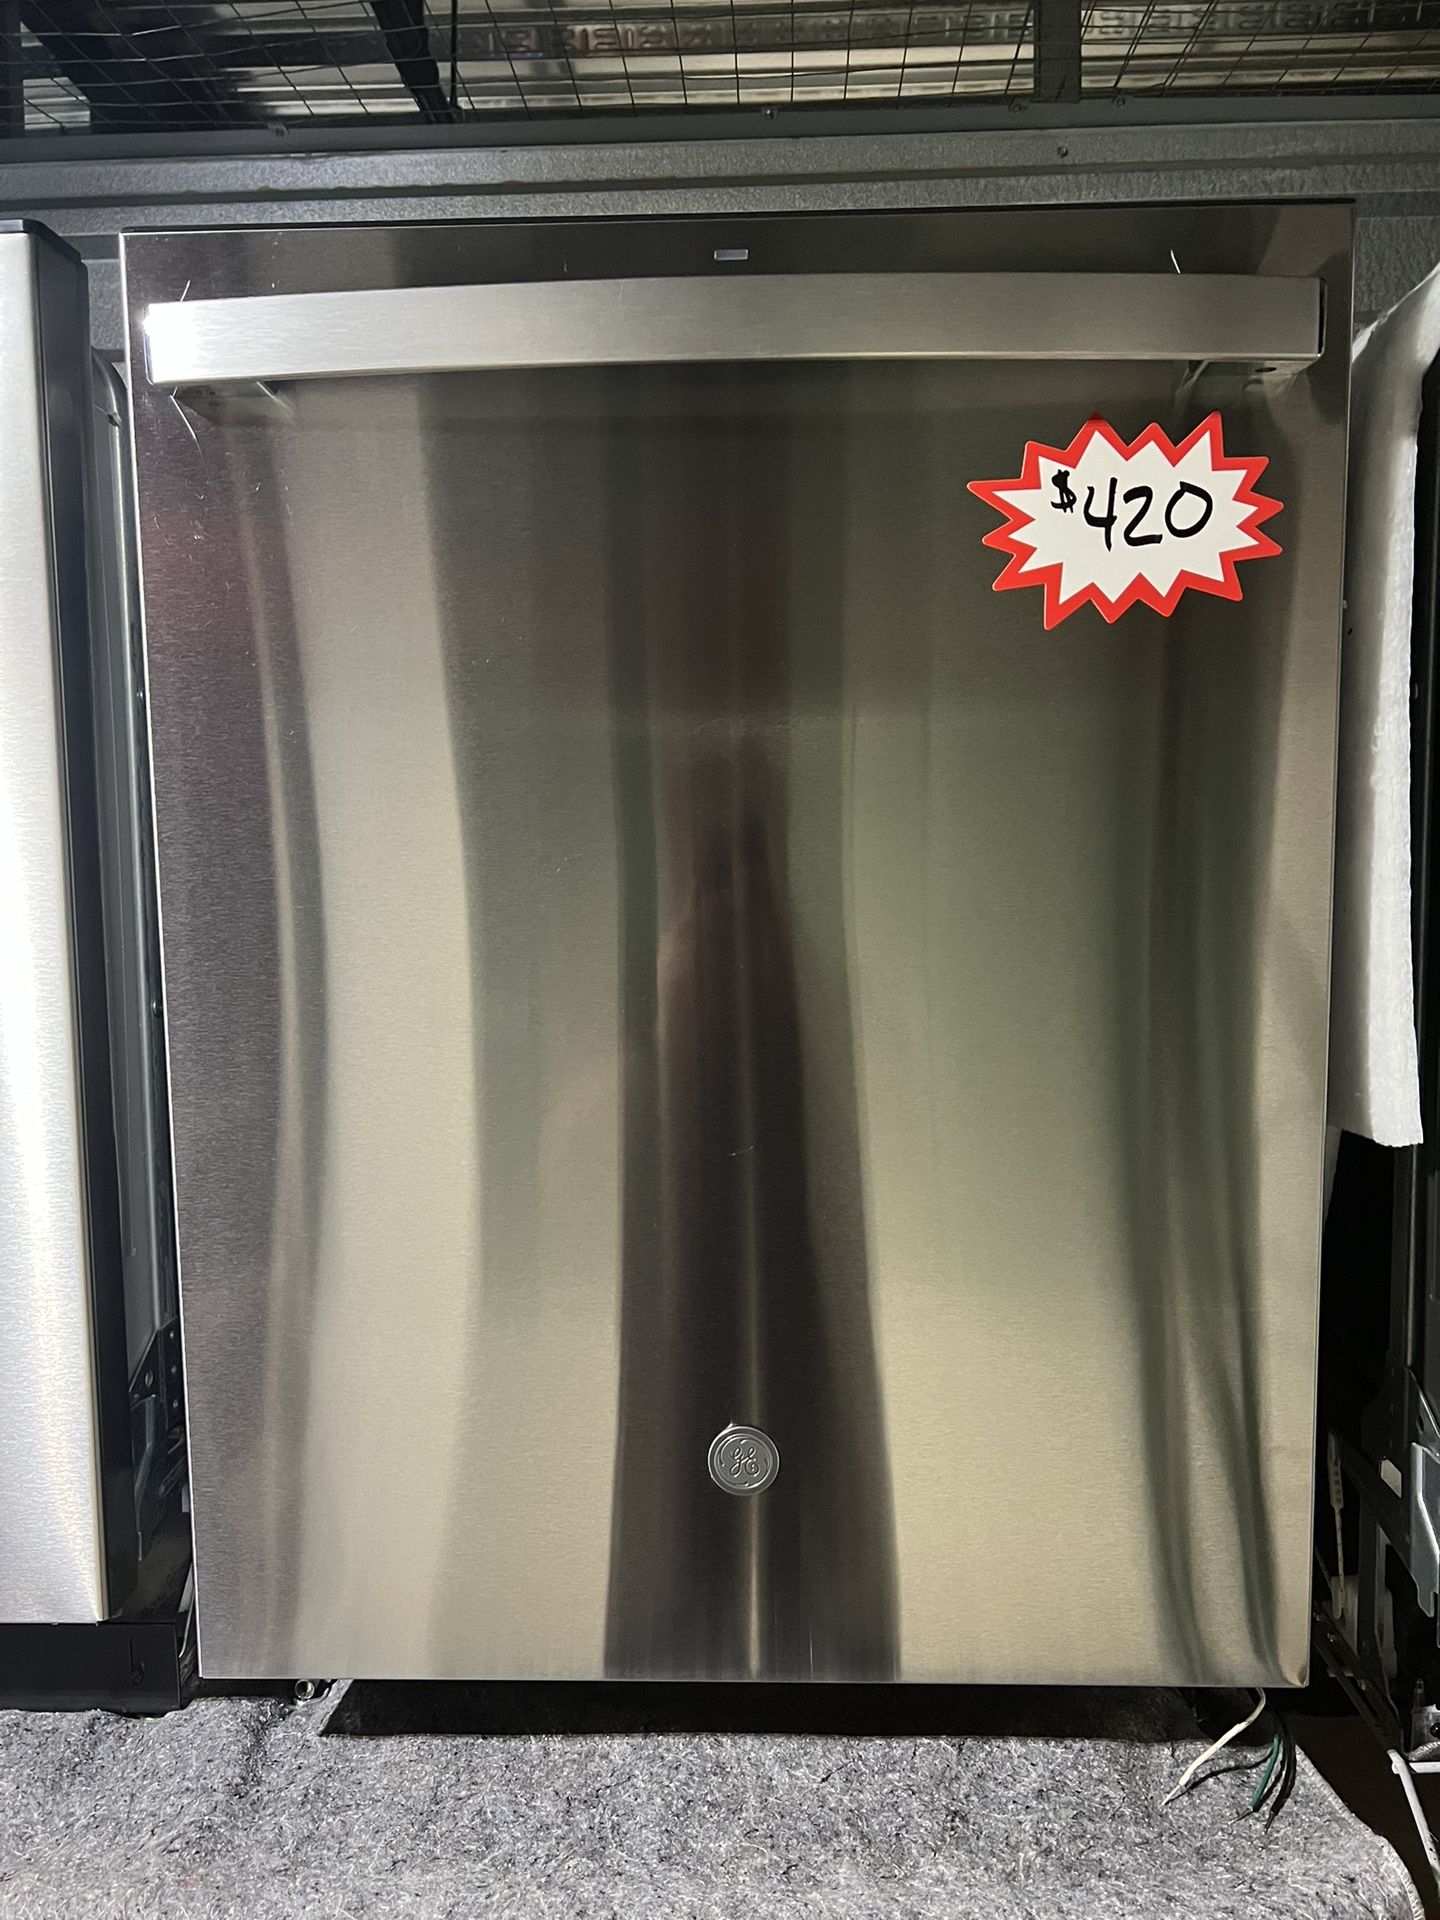 GE 24” Built-in Tall Tub SS Dishwasher w/ Sanitize And Dry Boost